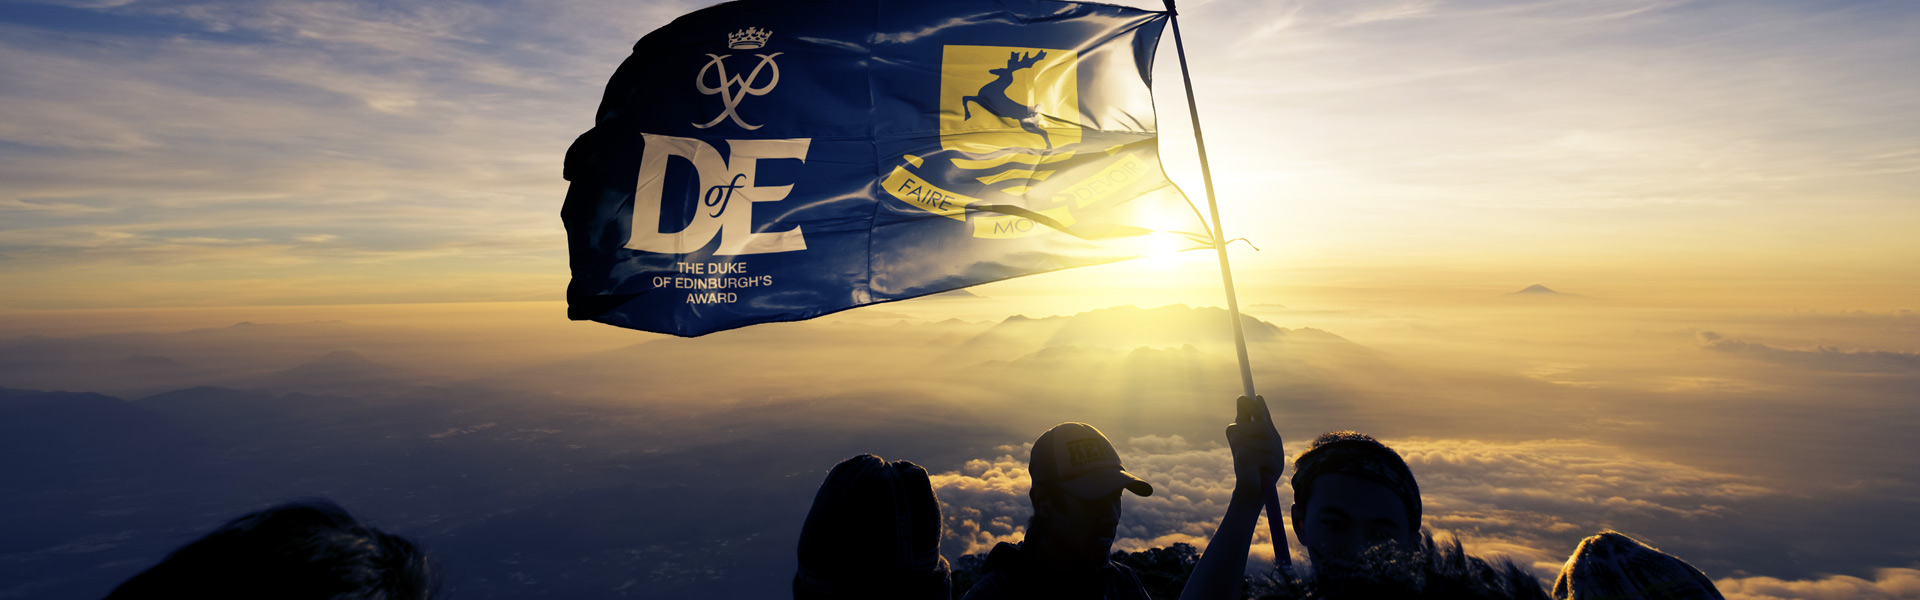 silouhetted figures hold up flag with school and duke of edinburgh logo at top of mountain